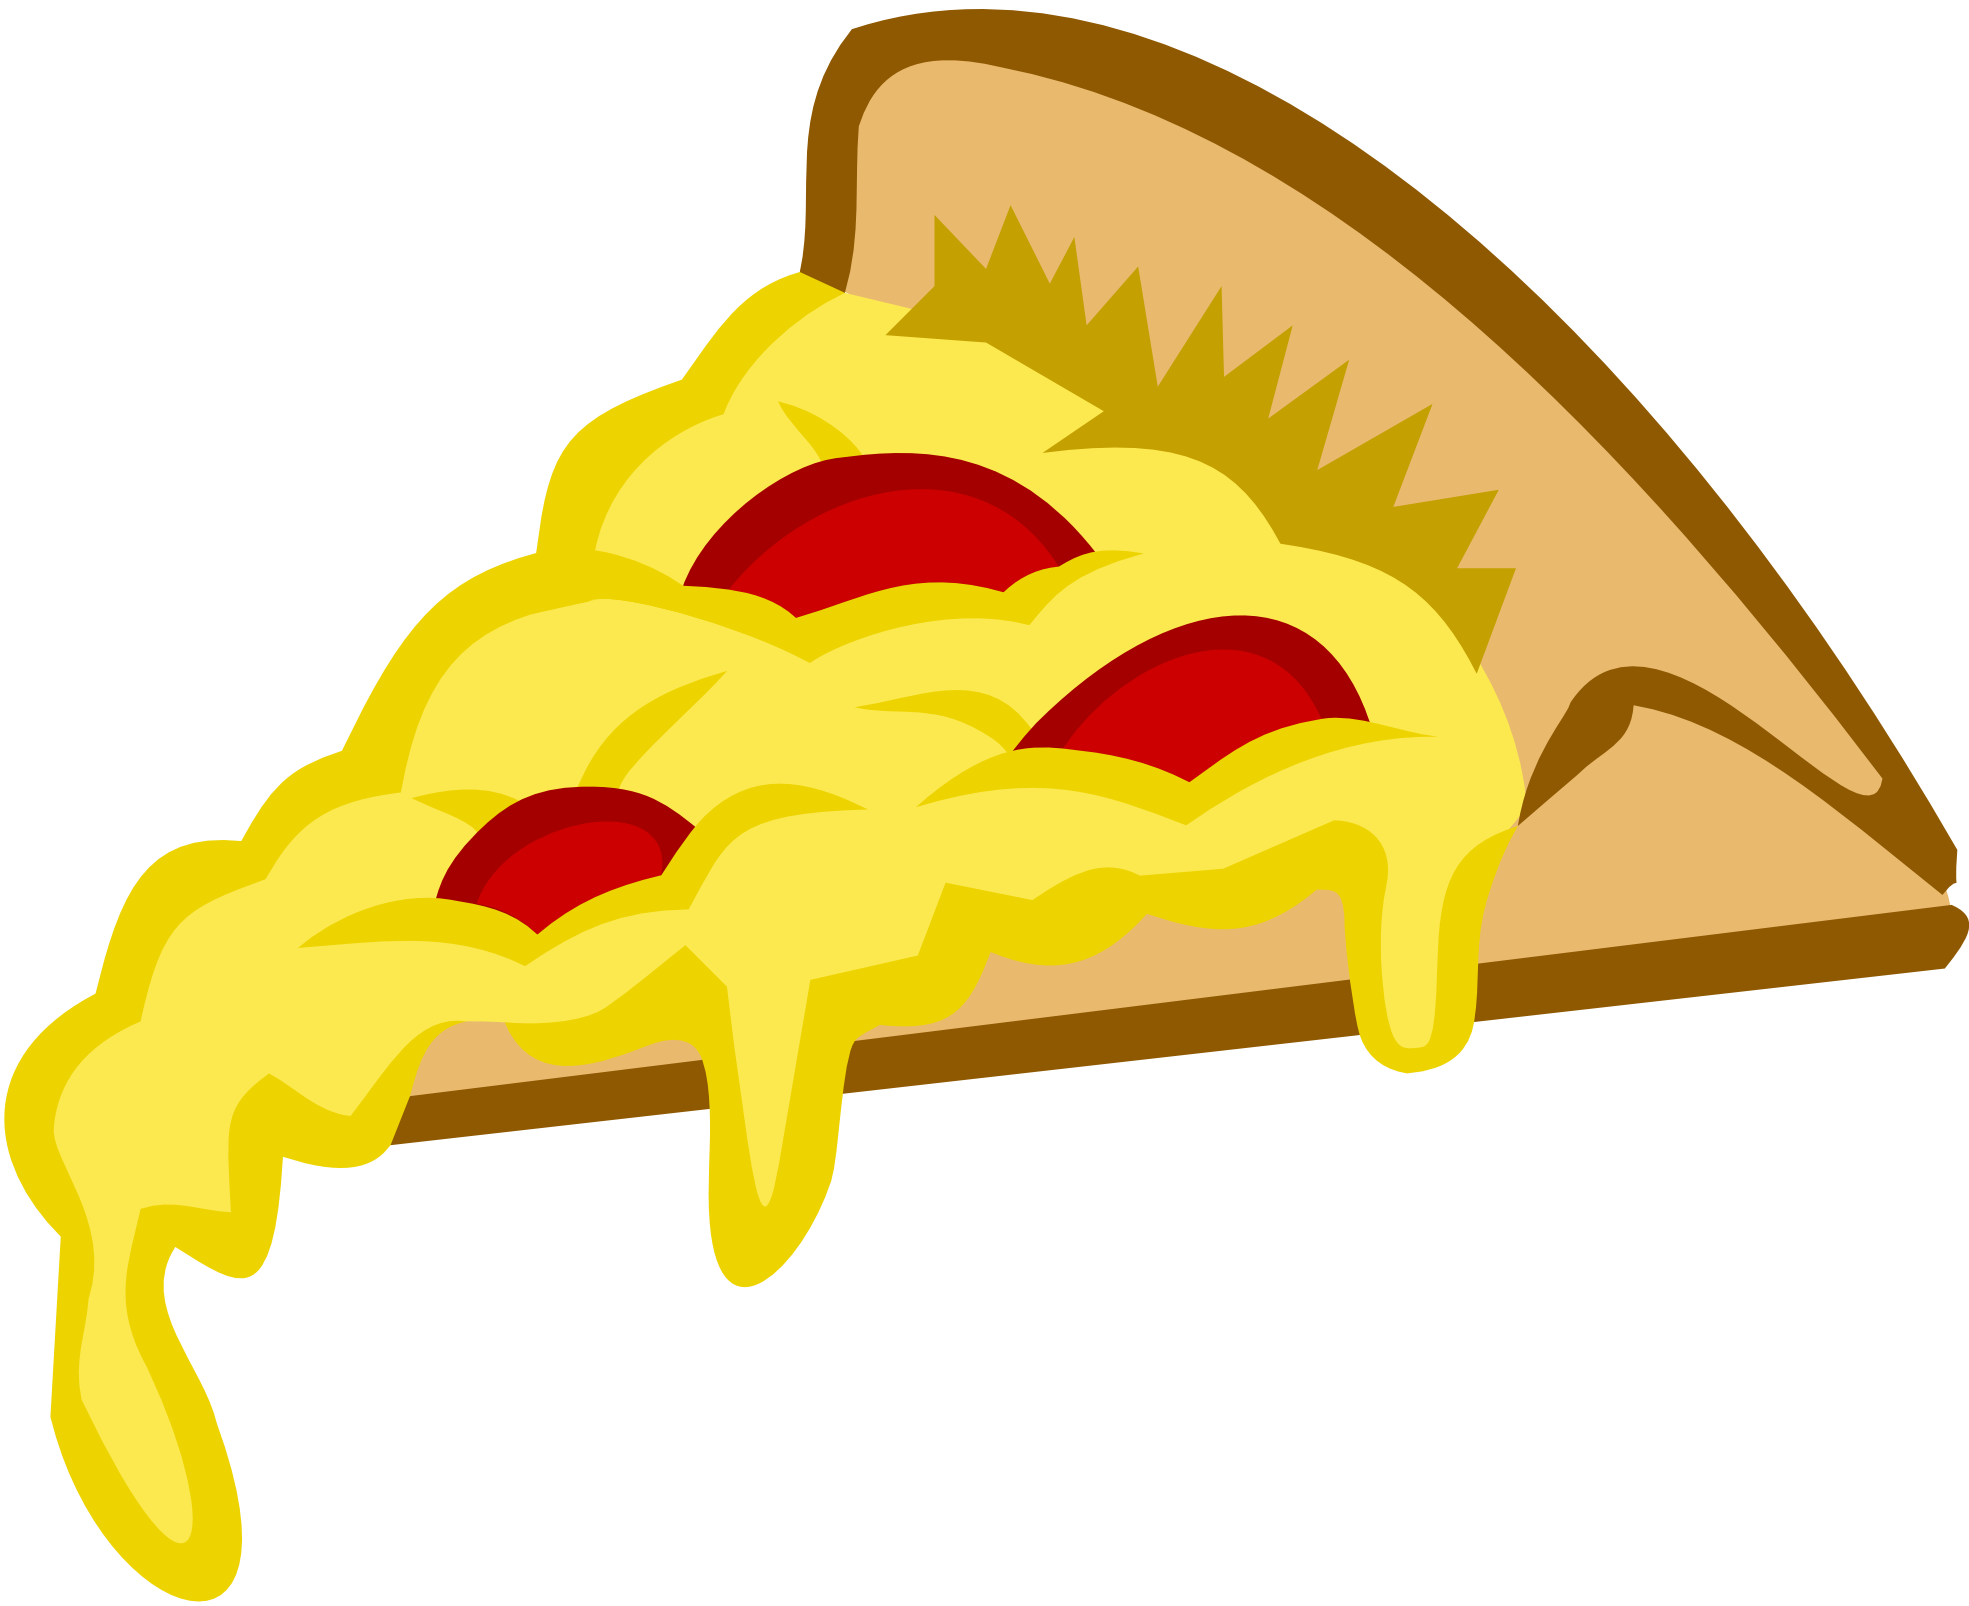 Pizza Vector | Free Download Clip Art | Free Clip Art | on Clipart ...